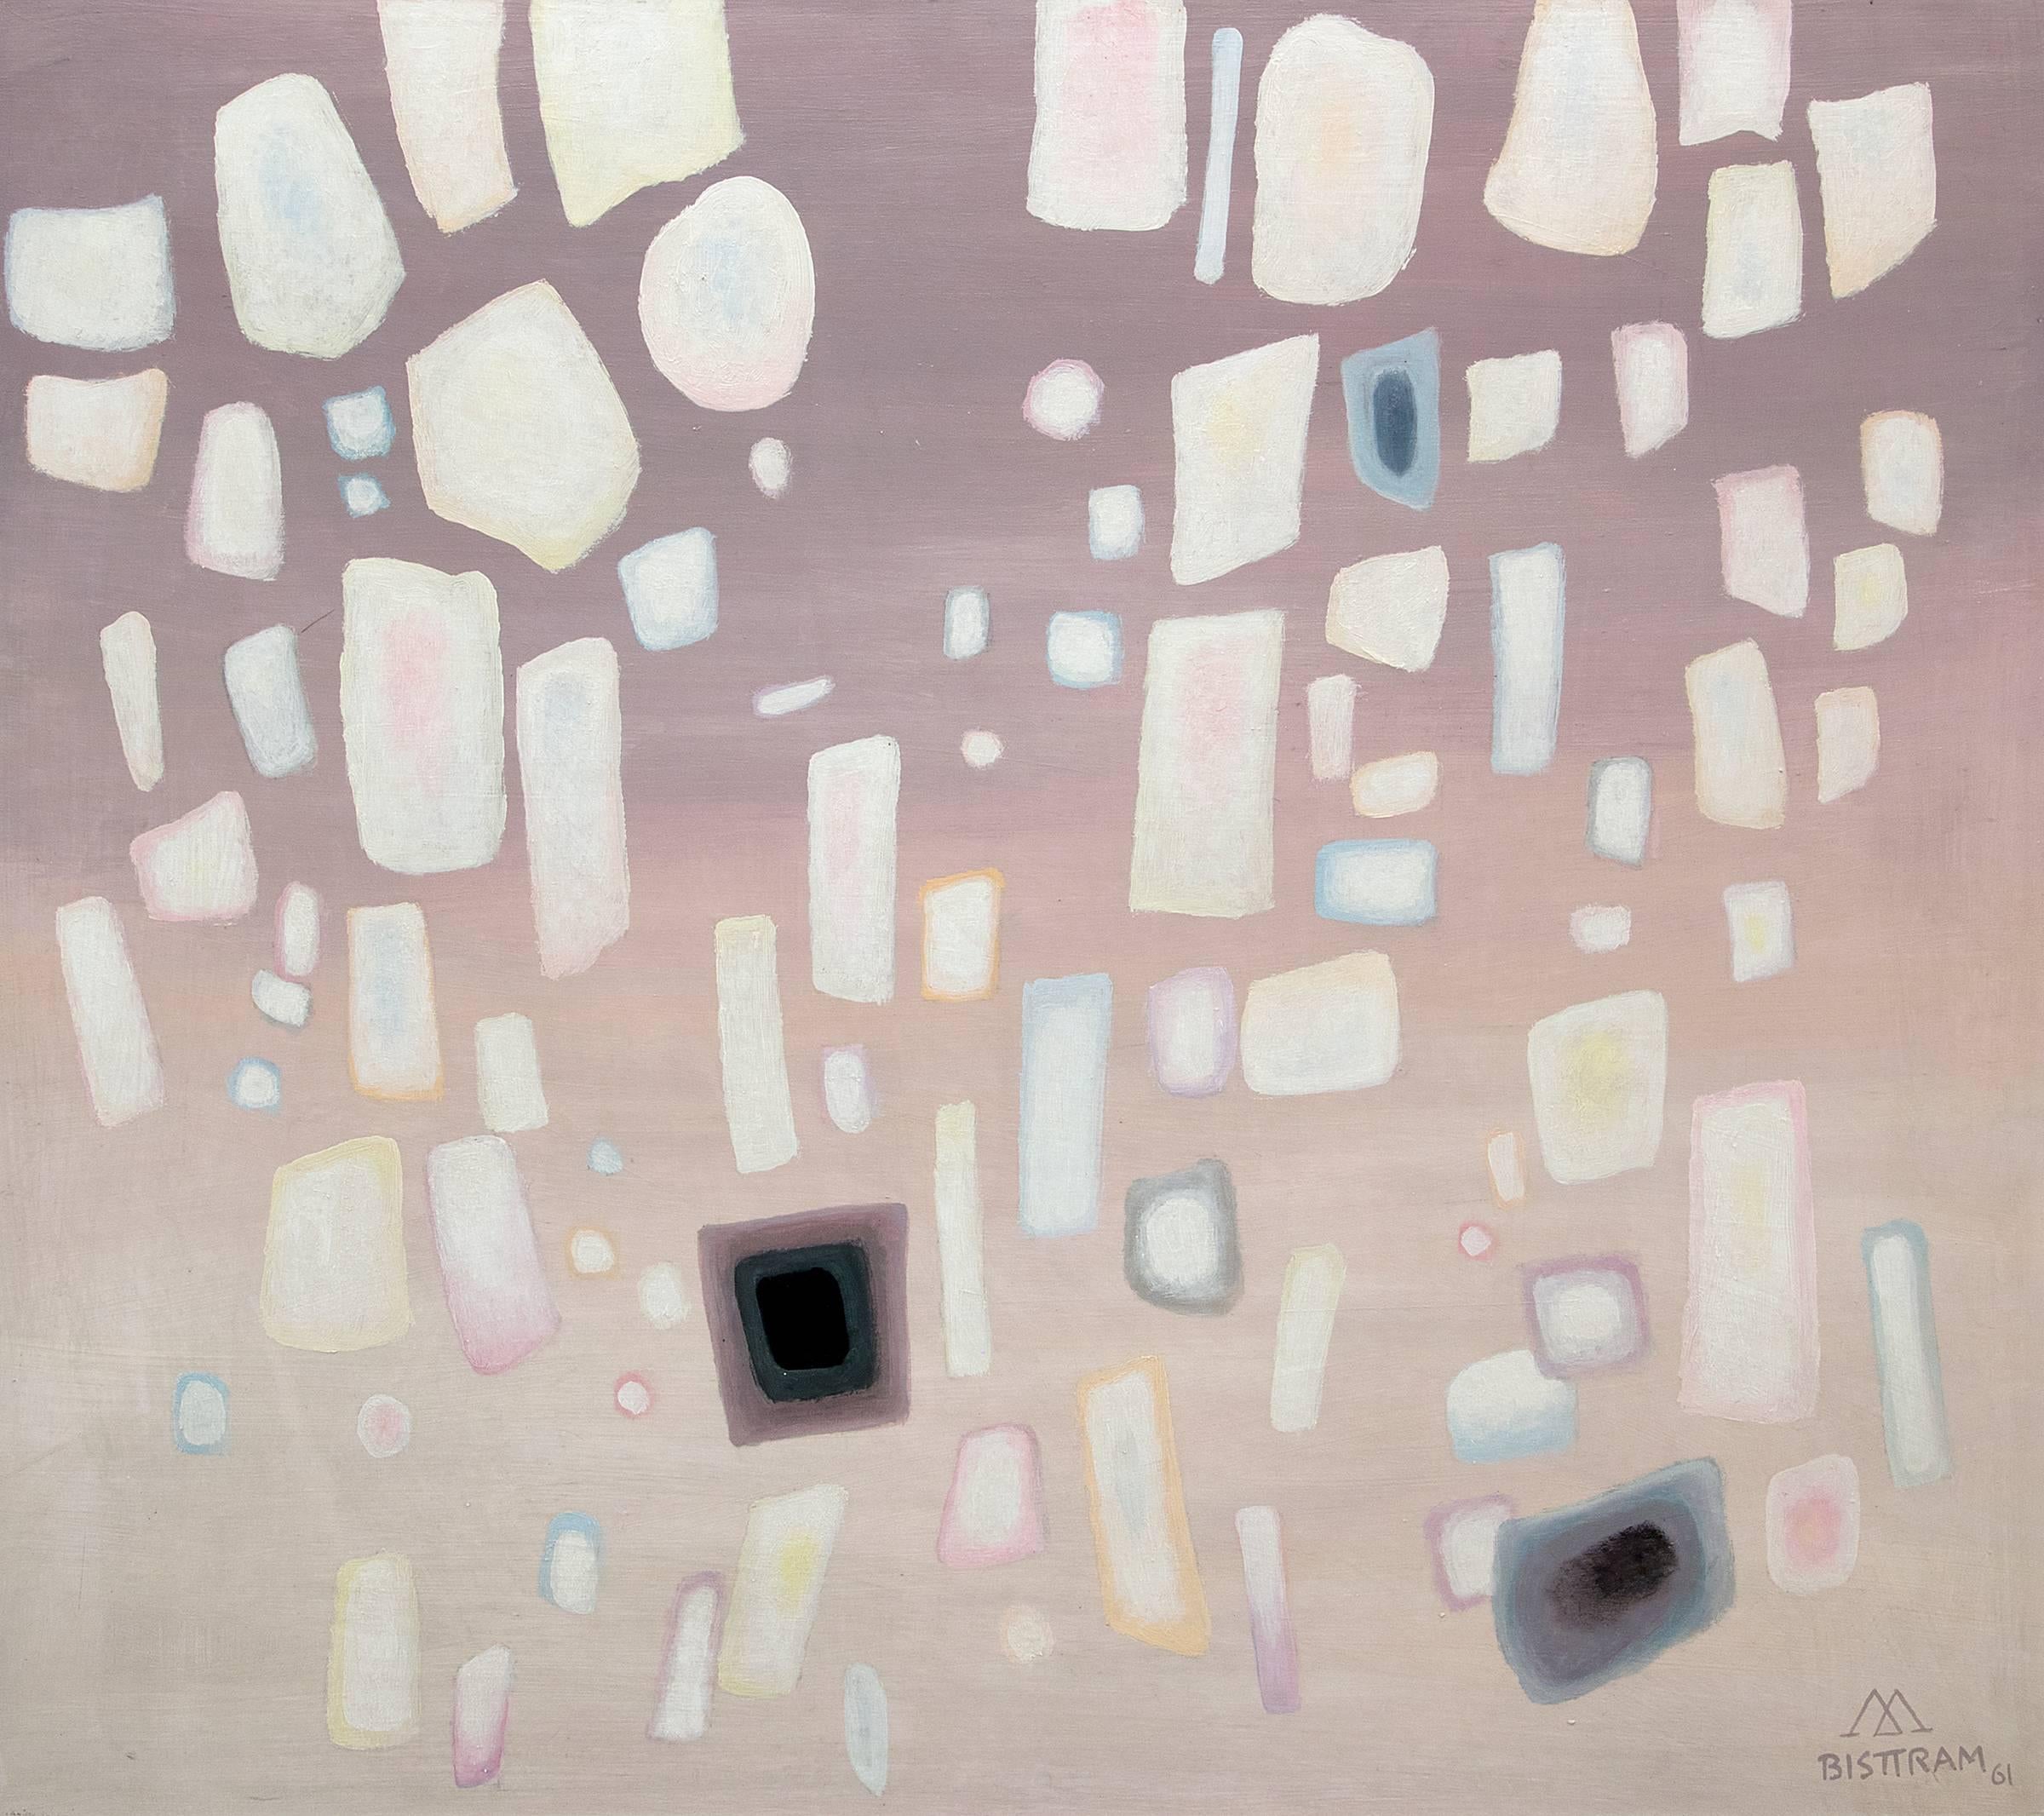 Emil James Bisttram Abstract Painting - Precipitation, 1960s Abstract Oil Painting of Floating Shapes, Purple White Gray